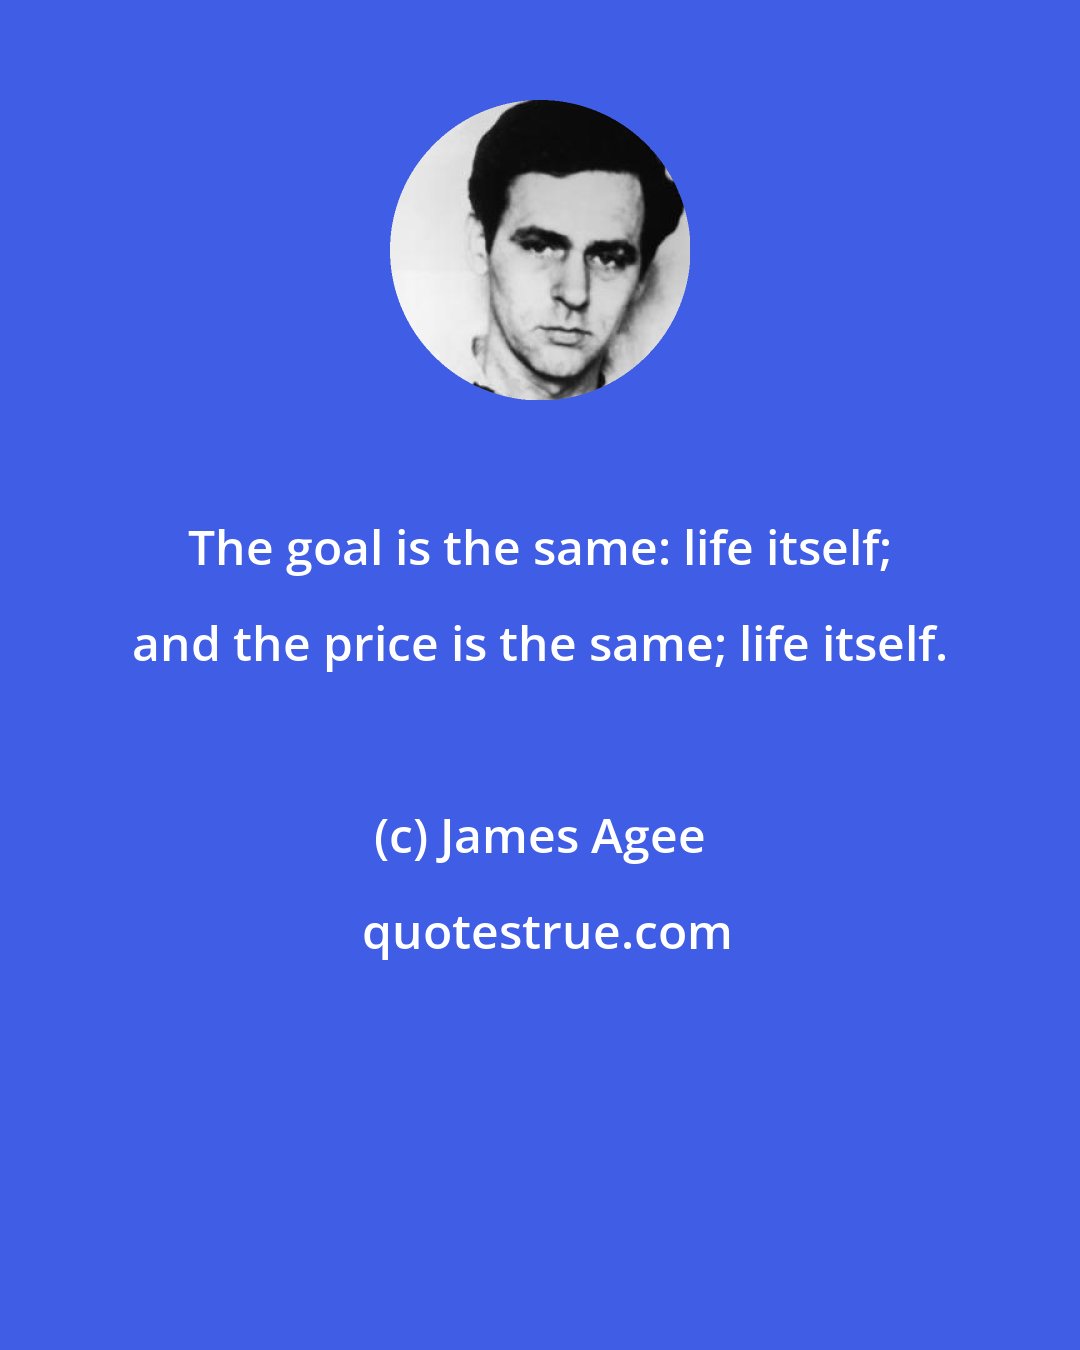 James Agee: The goal is the same: life itself; and the price is the same; life itself.